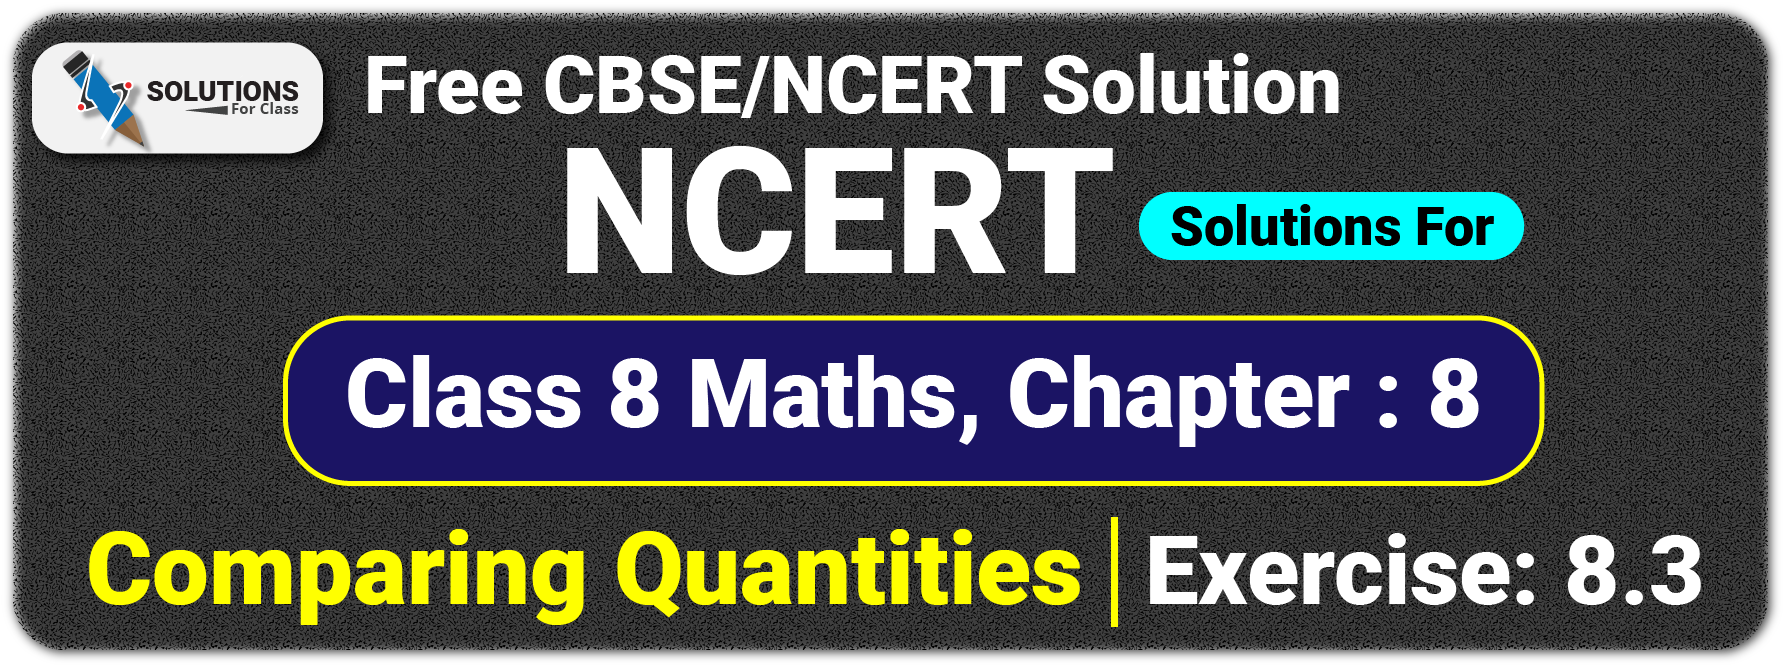 NCERT Solutions For Class 8 Chapter 8, Comparing Quantities, Exercise 8.3